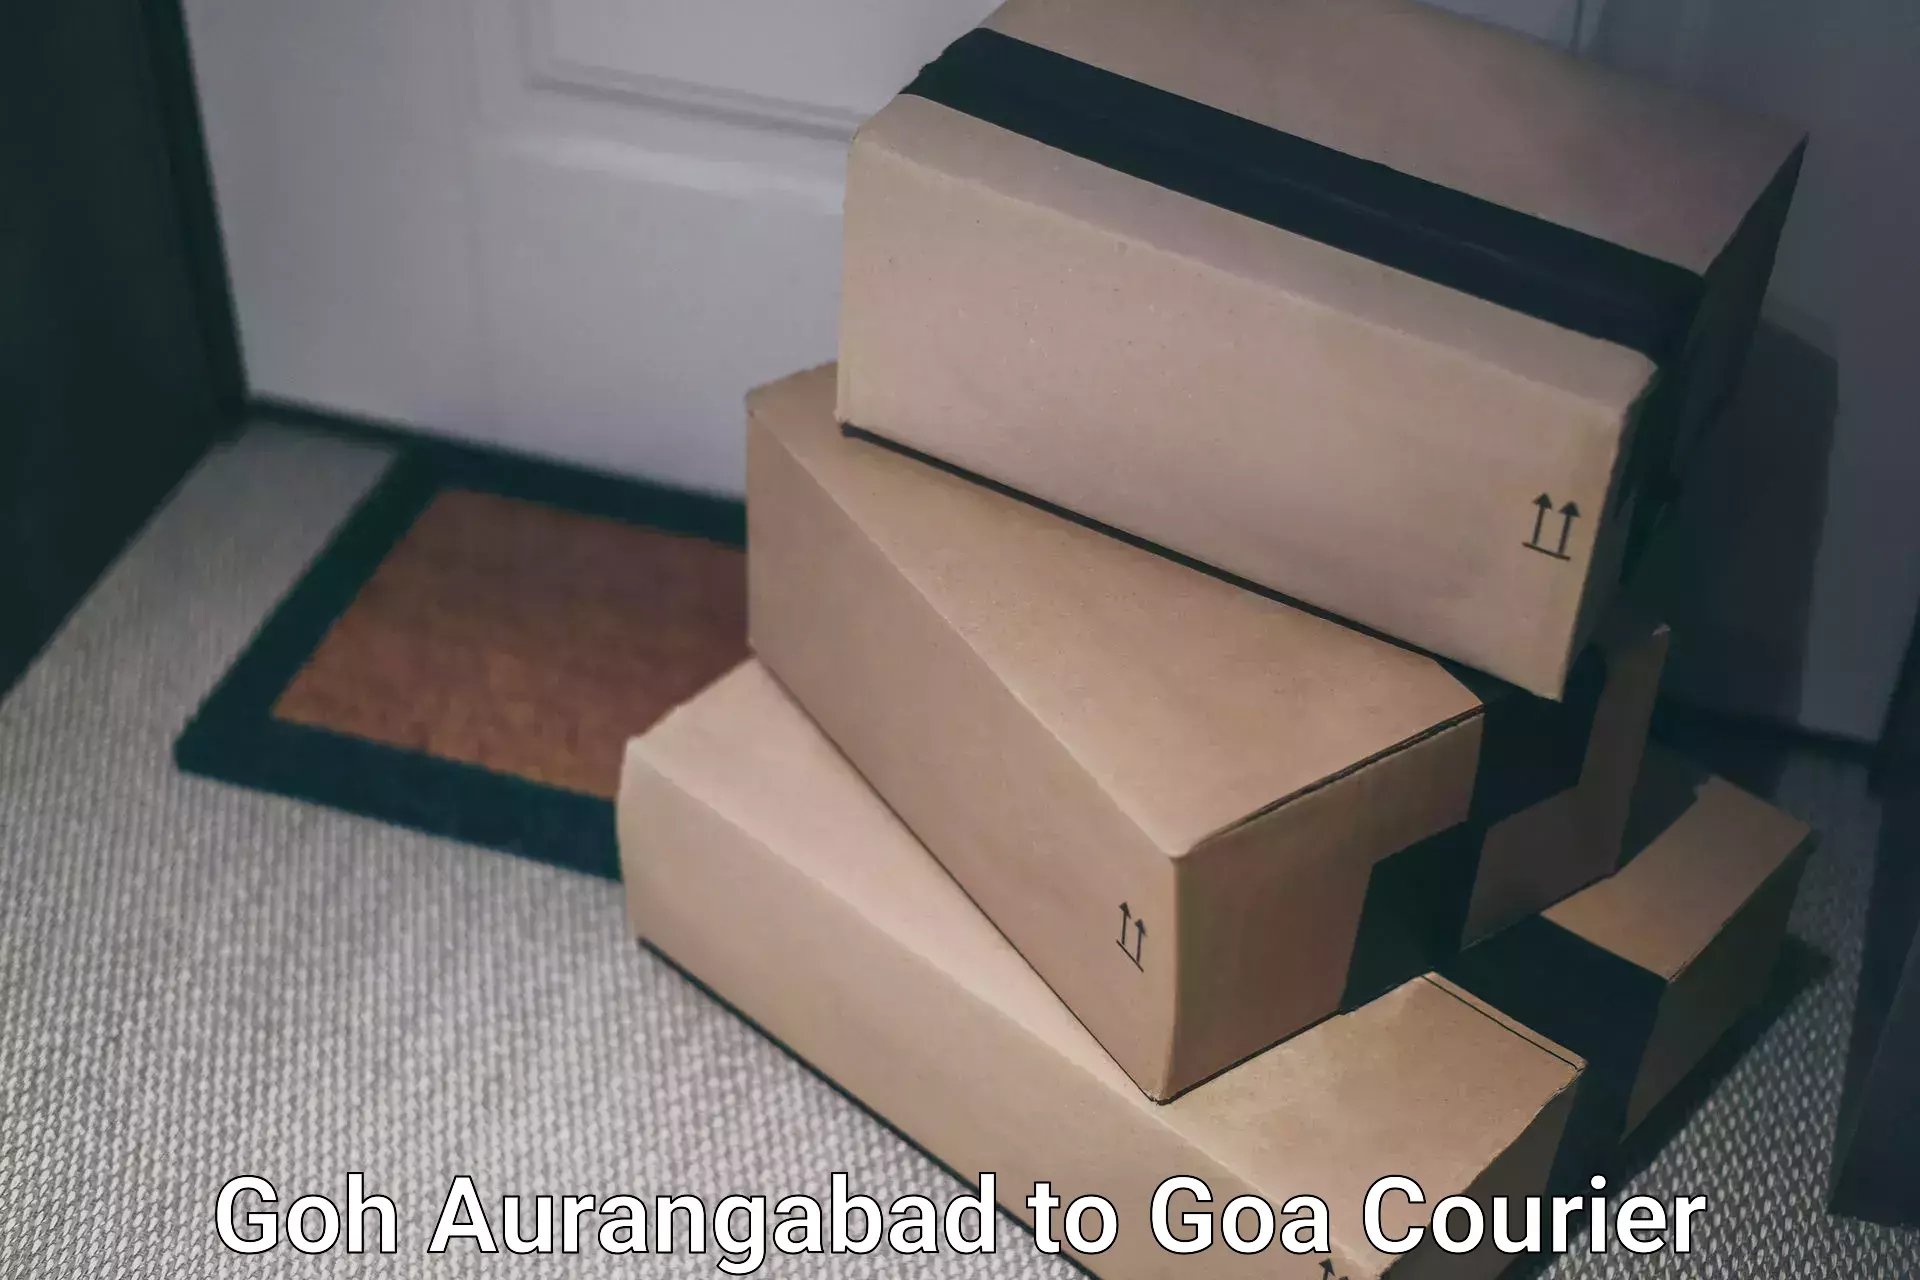 User-friendly delivery service Goh Aurangabad to South Goa